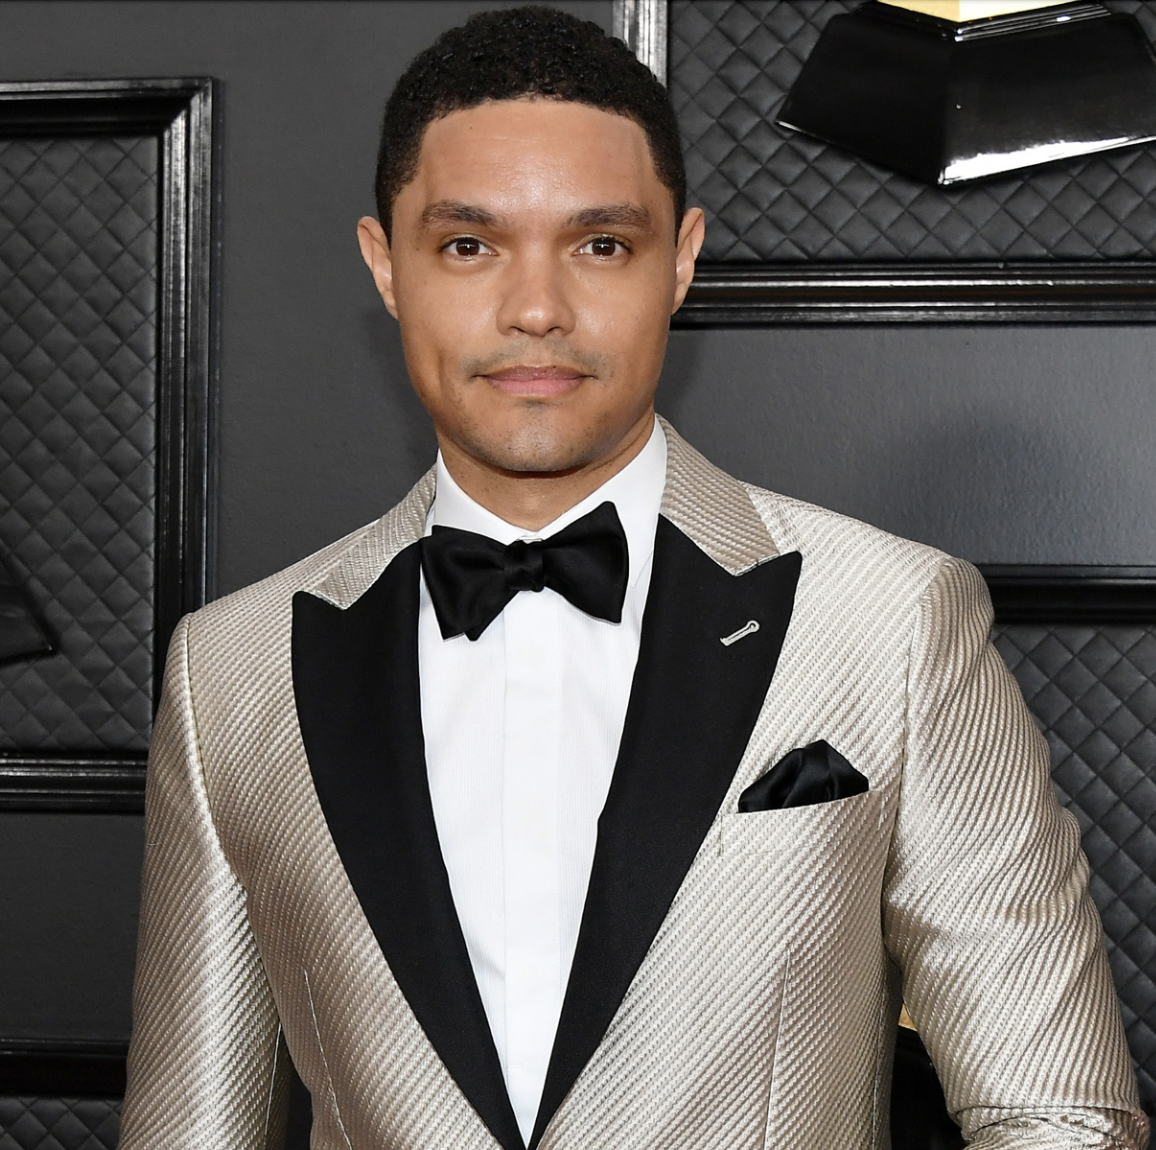 Trevor Noah and Minka Kelly Have Broken Up (Again!) After Two Years of Dating